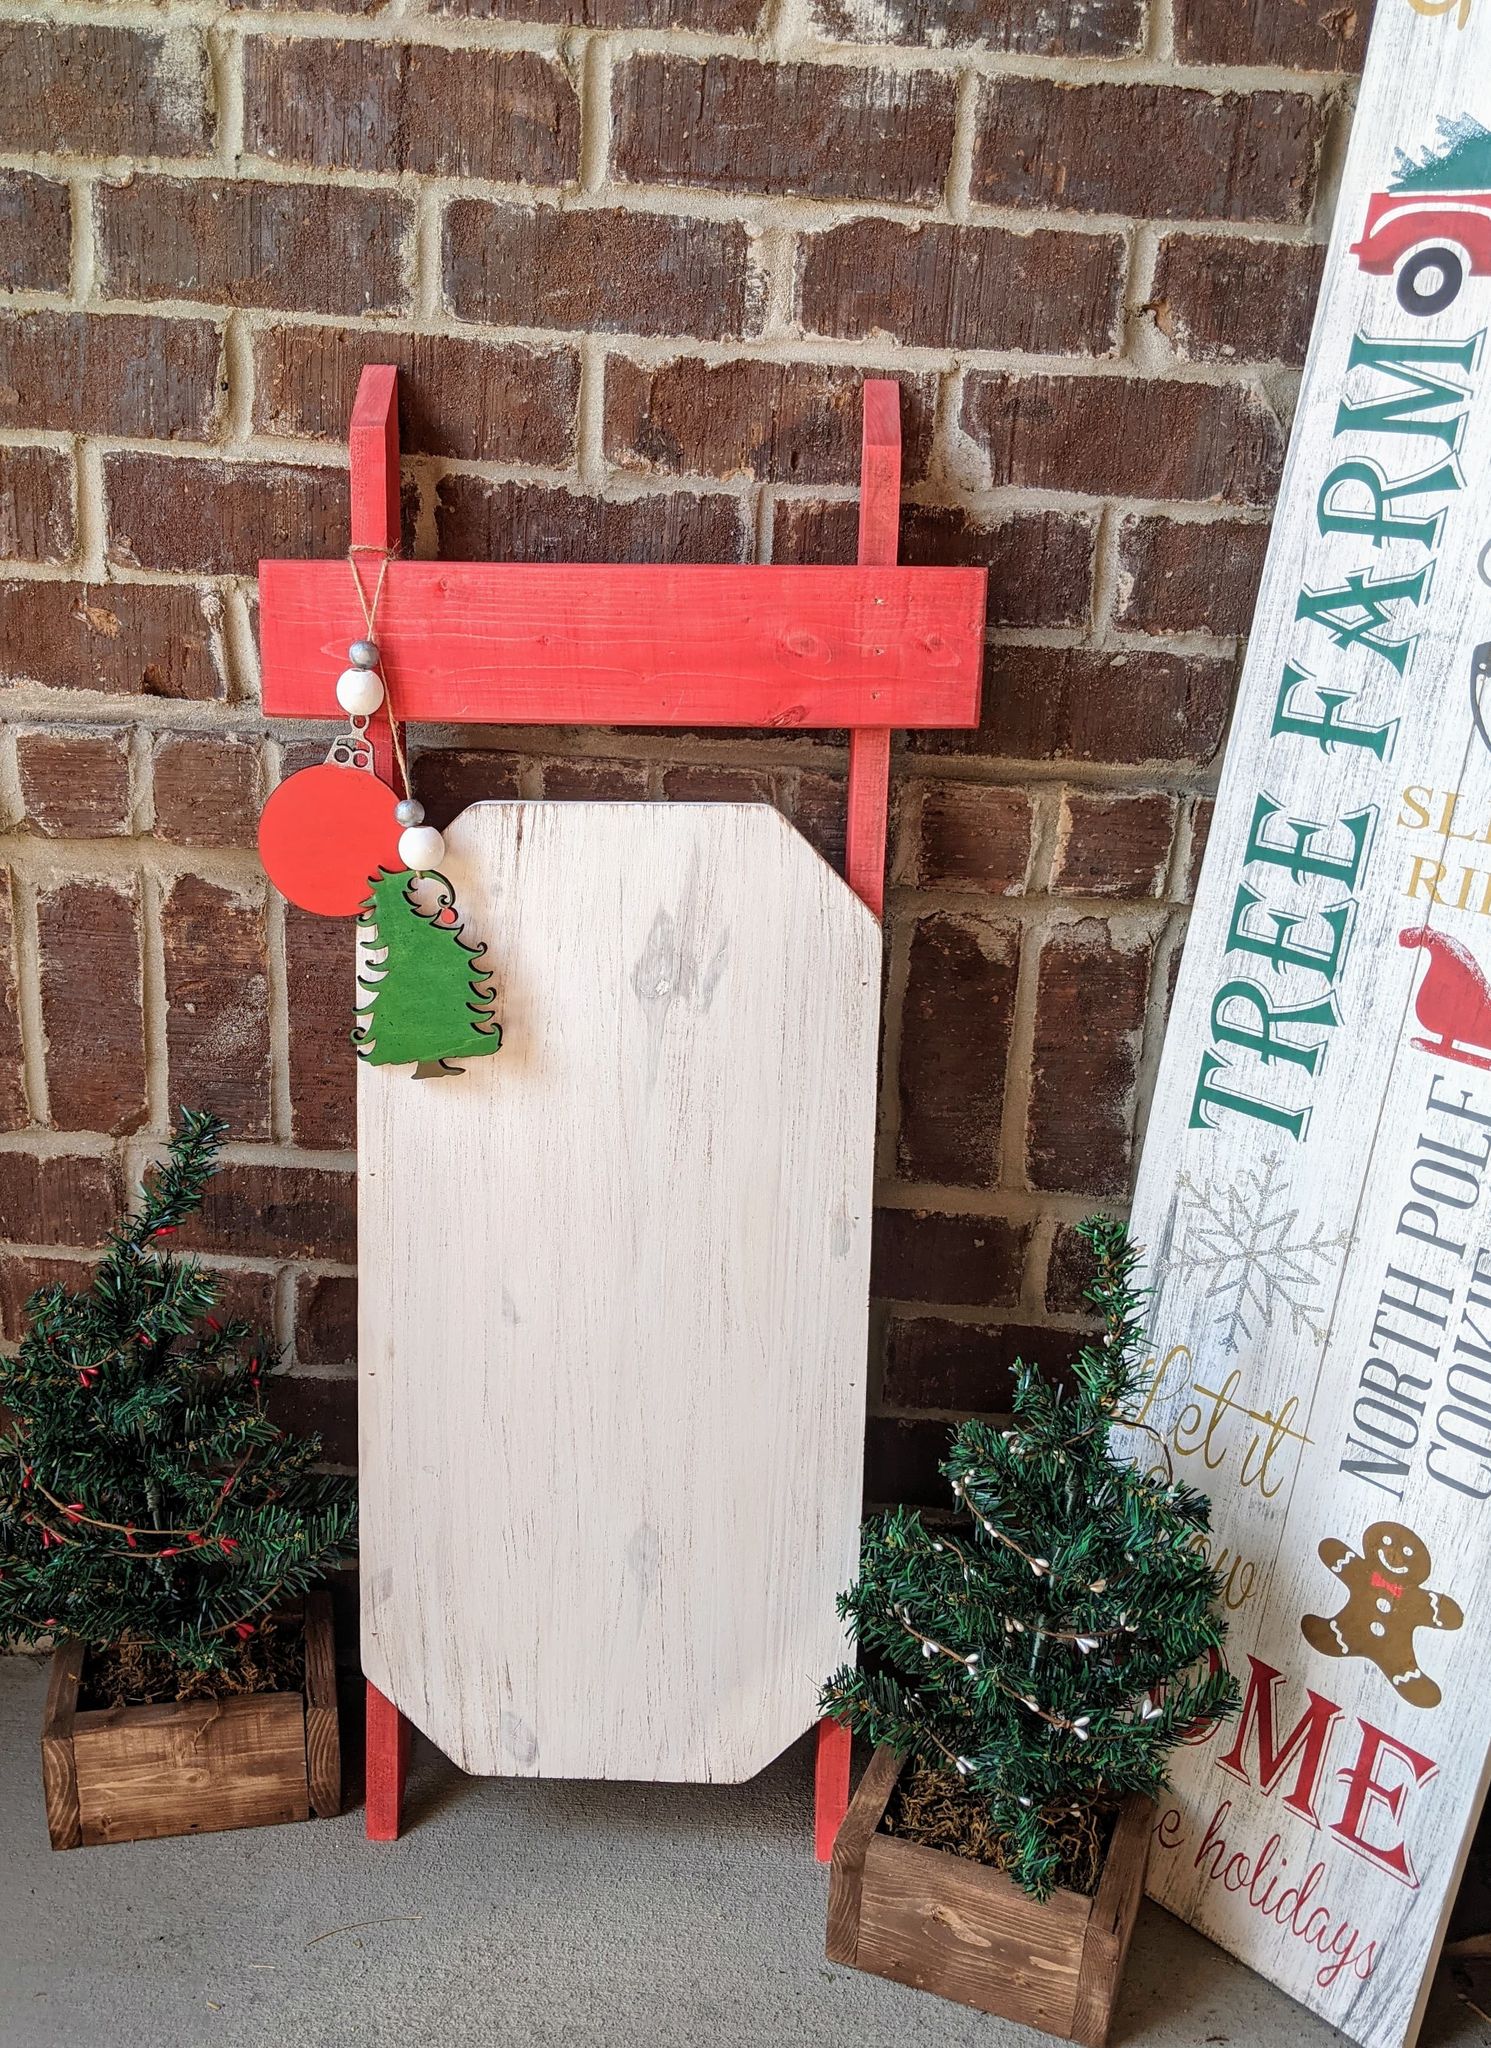 Winter Sled - Merry Mean one with family name